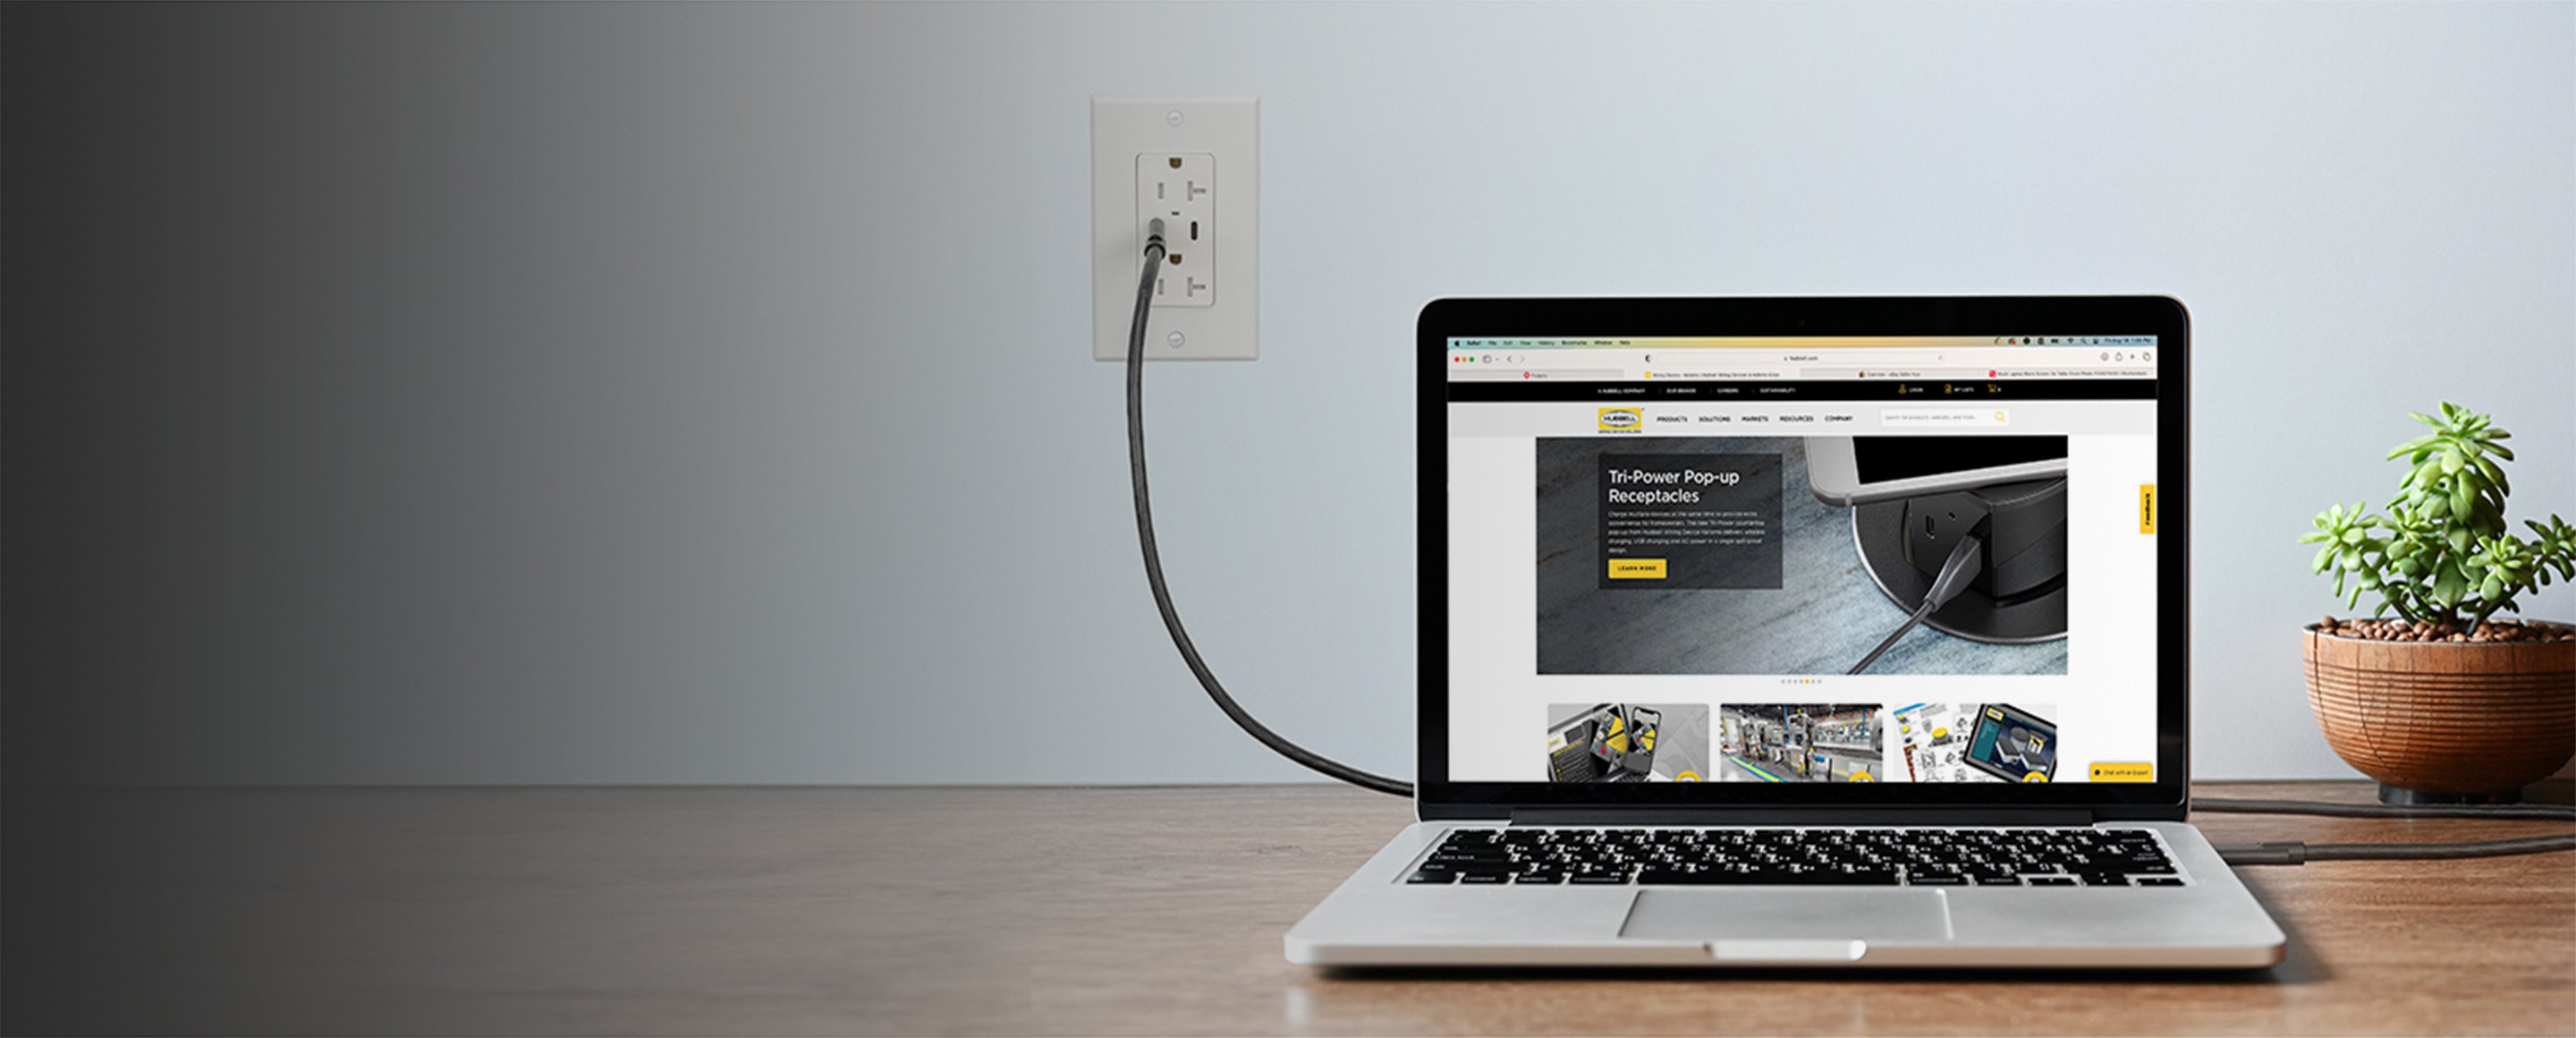 High-power USB-C receptacles charge laptops and devices faster